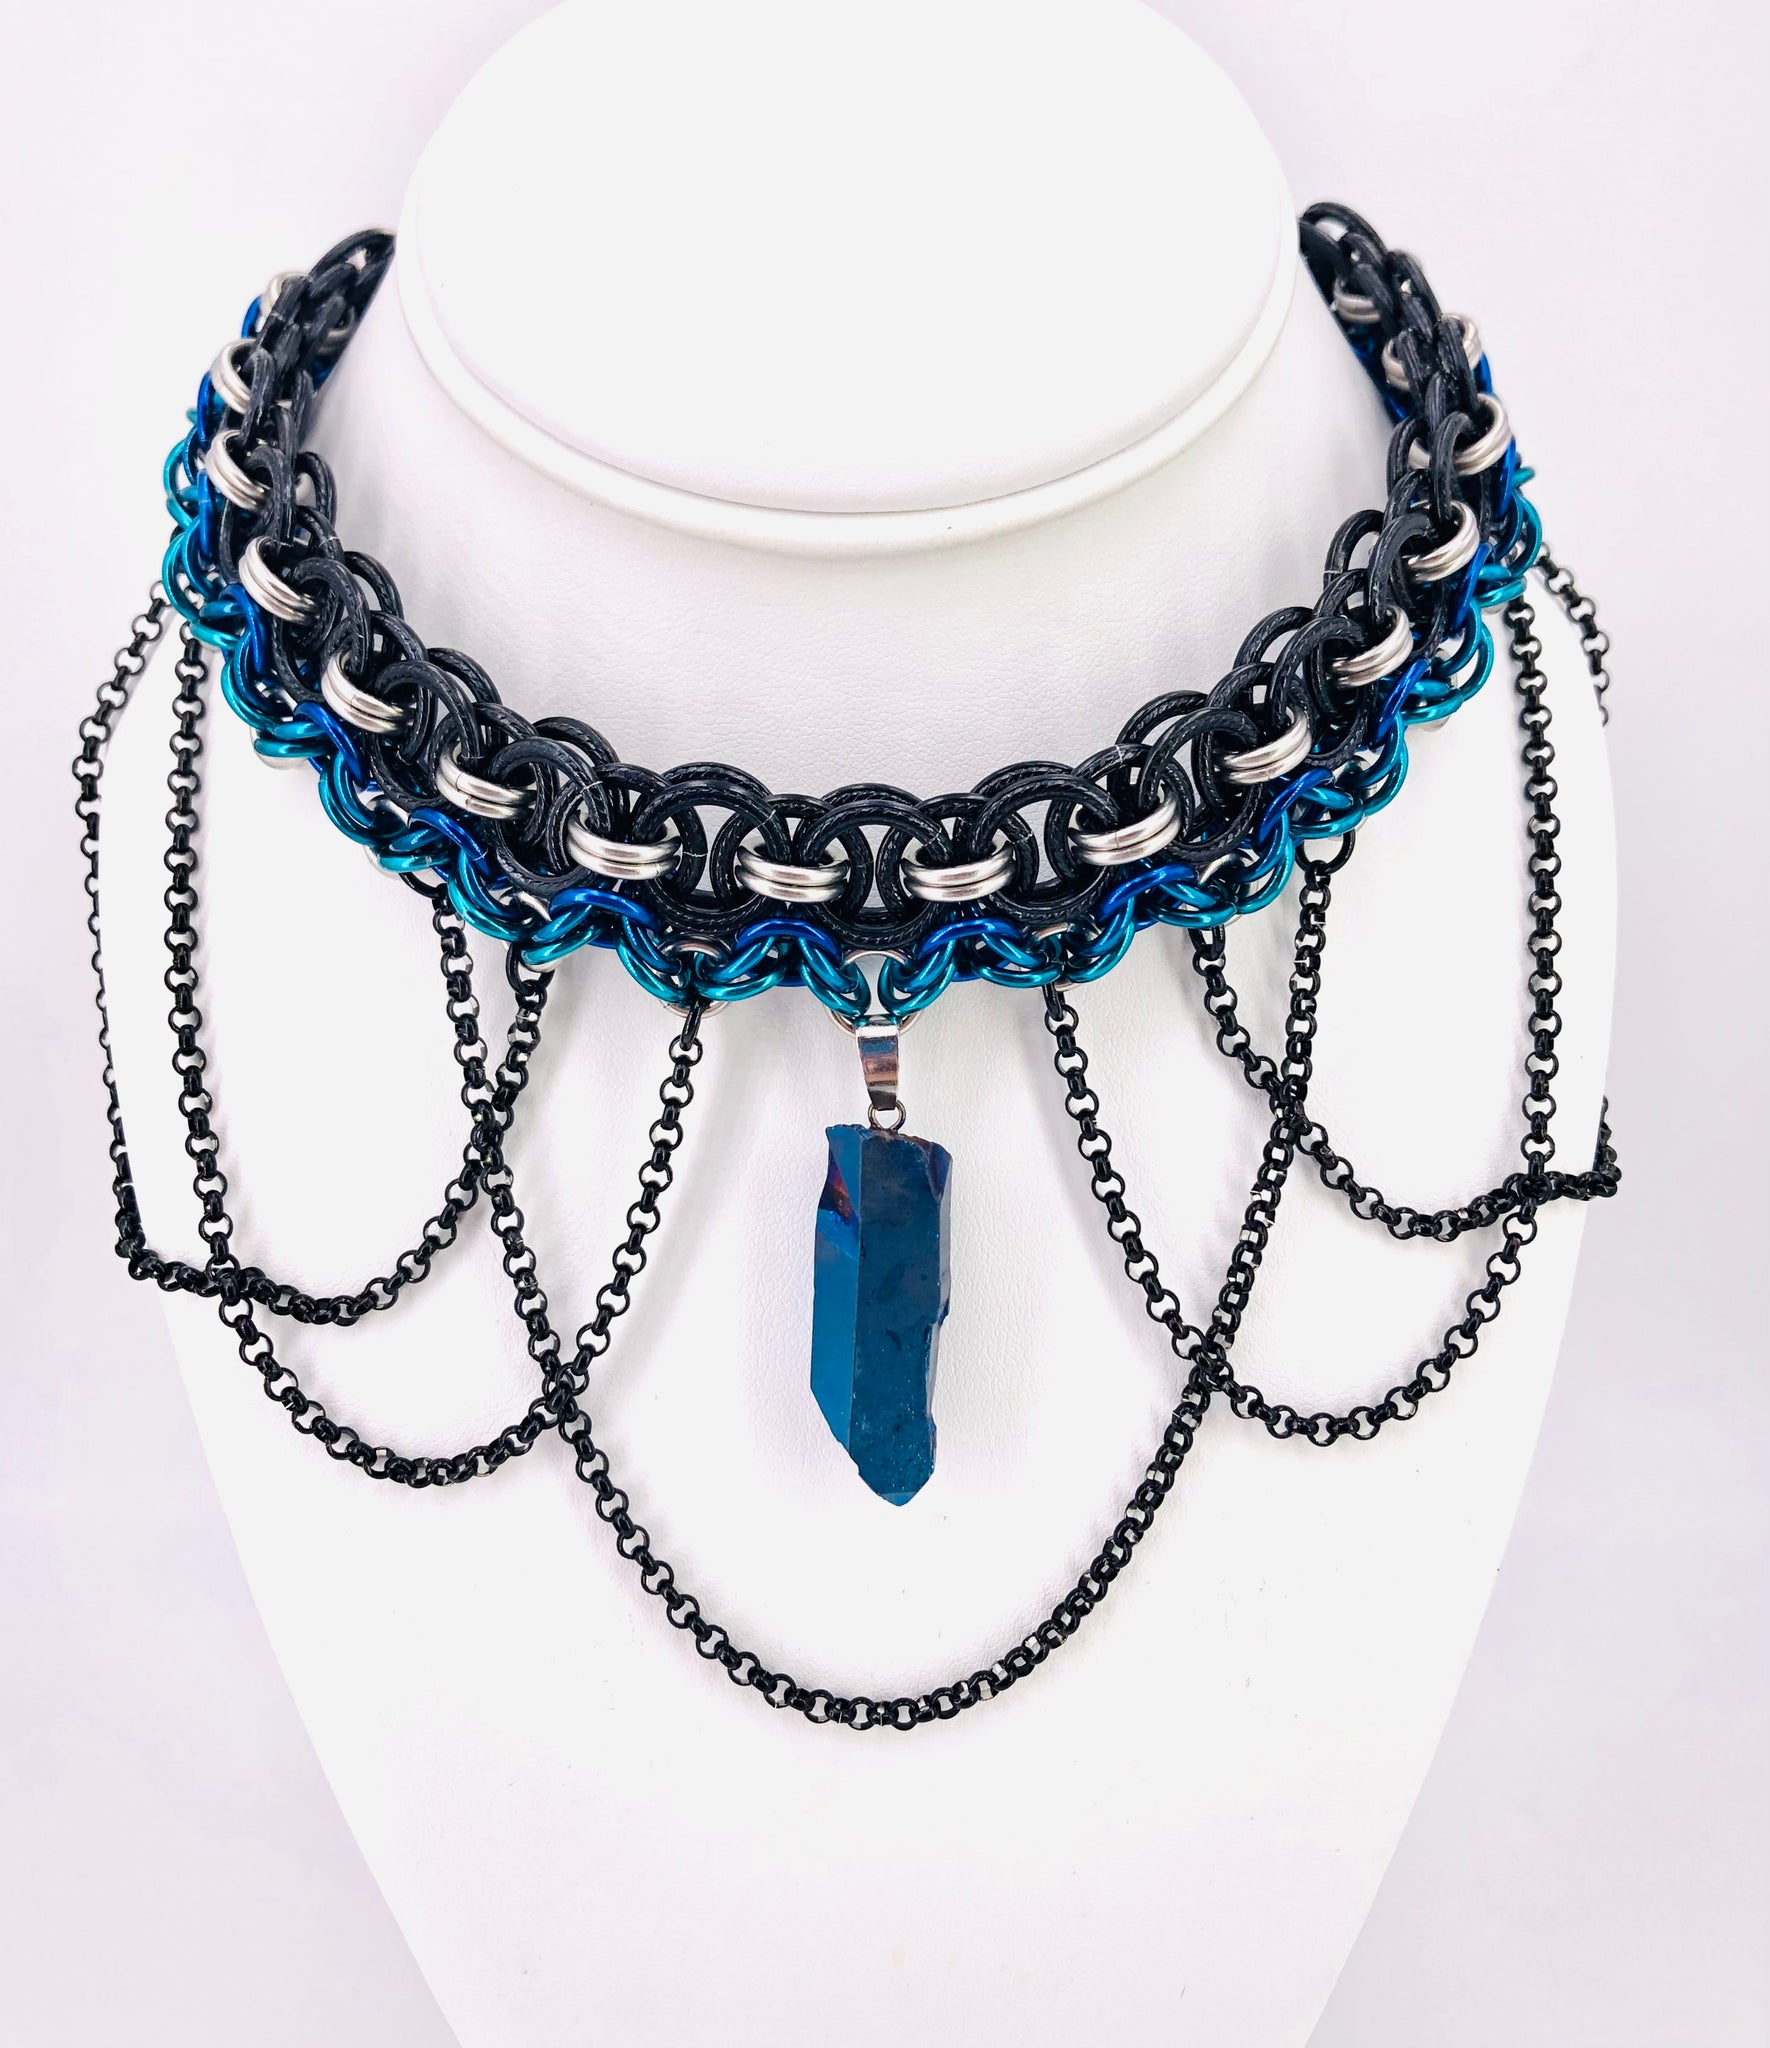 Teal, Blue, Black, and Steel Chainmaille Statement Necklace with Stone and Chains